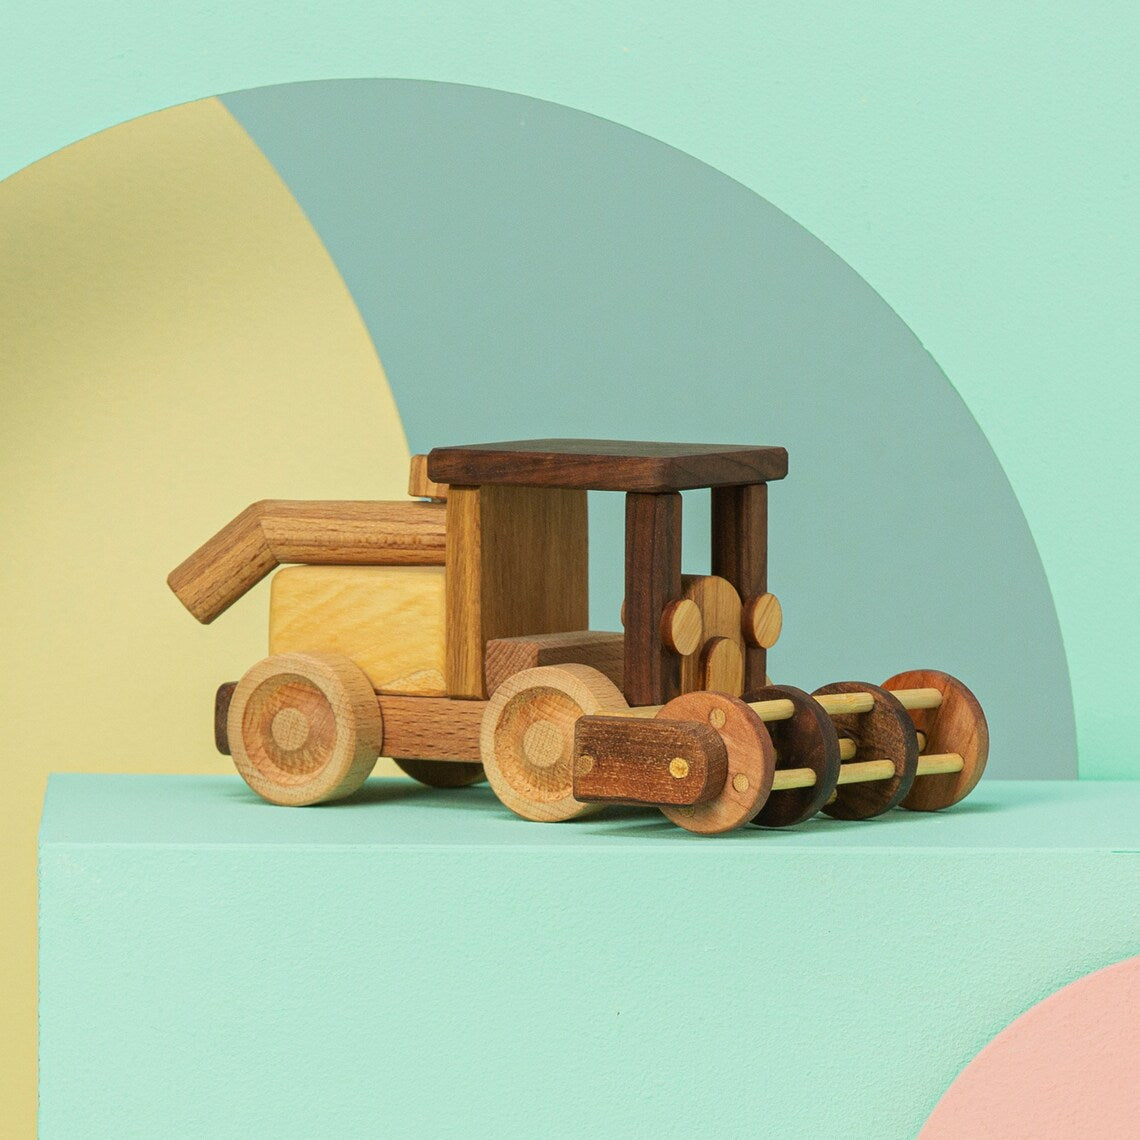 Wooden Toy Combine Harvester, Wooden Toys for Kids, Gift for Toddlers,  Baby's First, Handmade Toys 